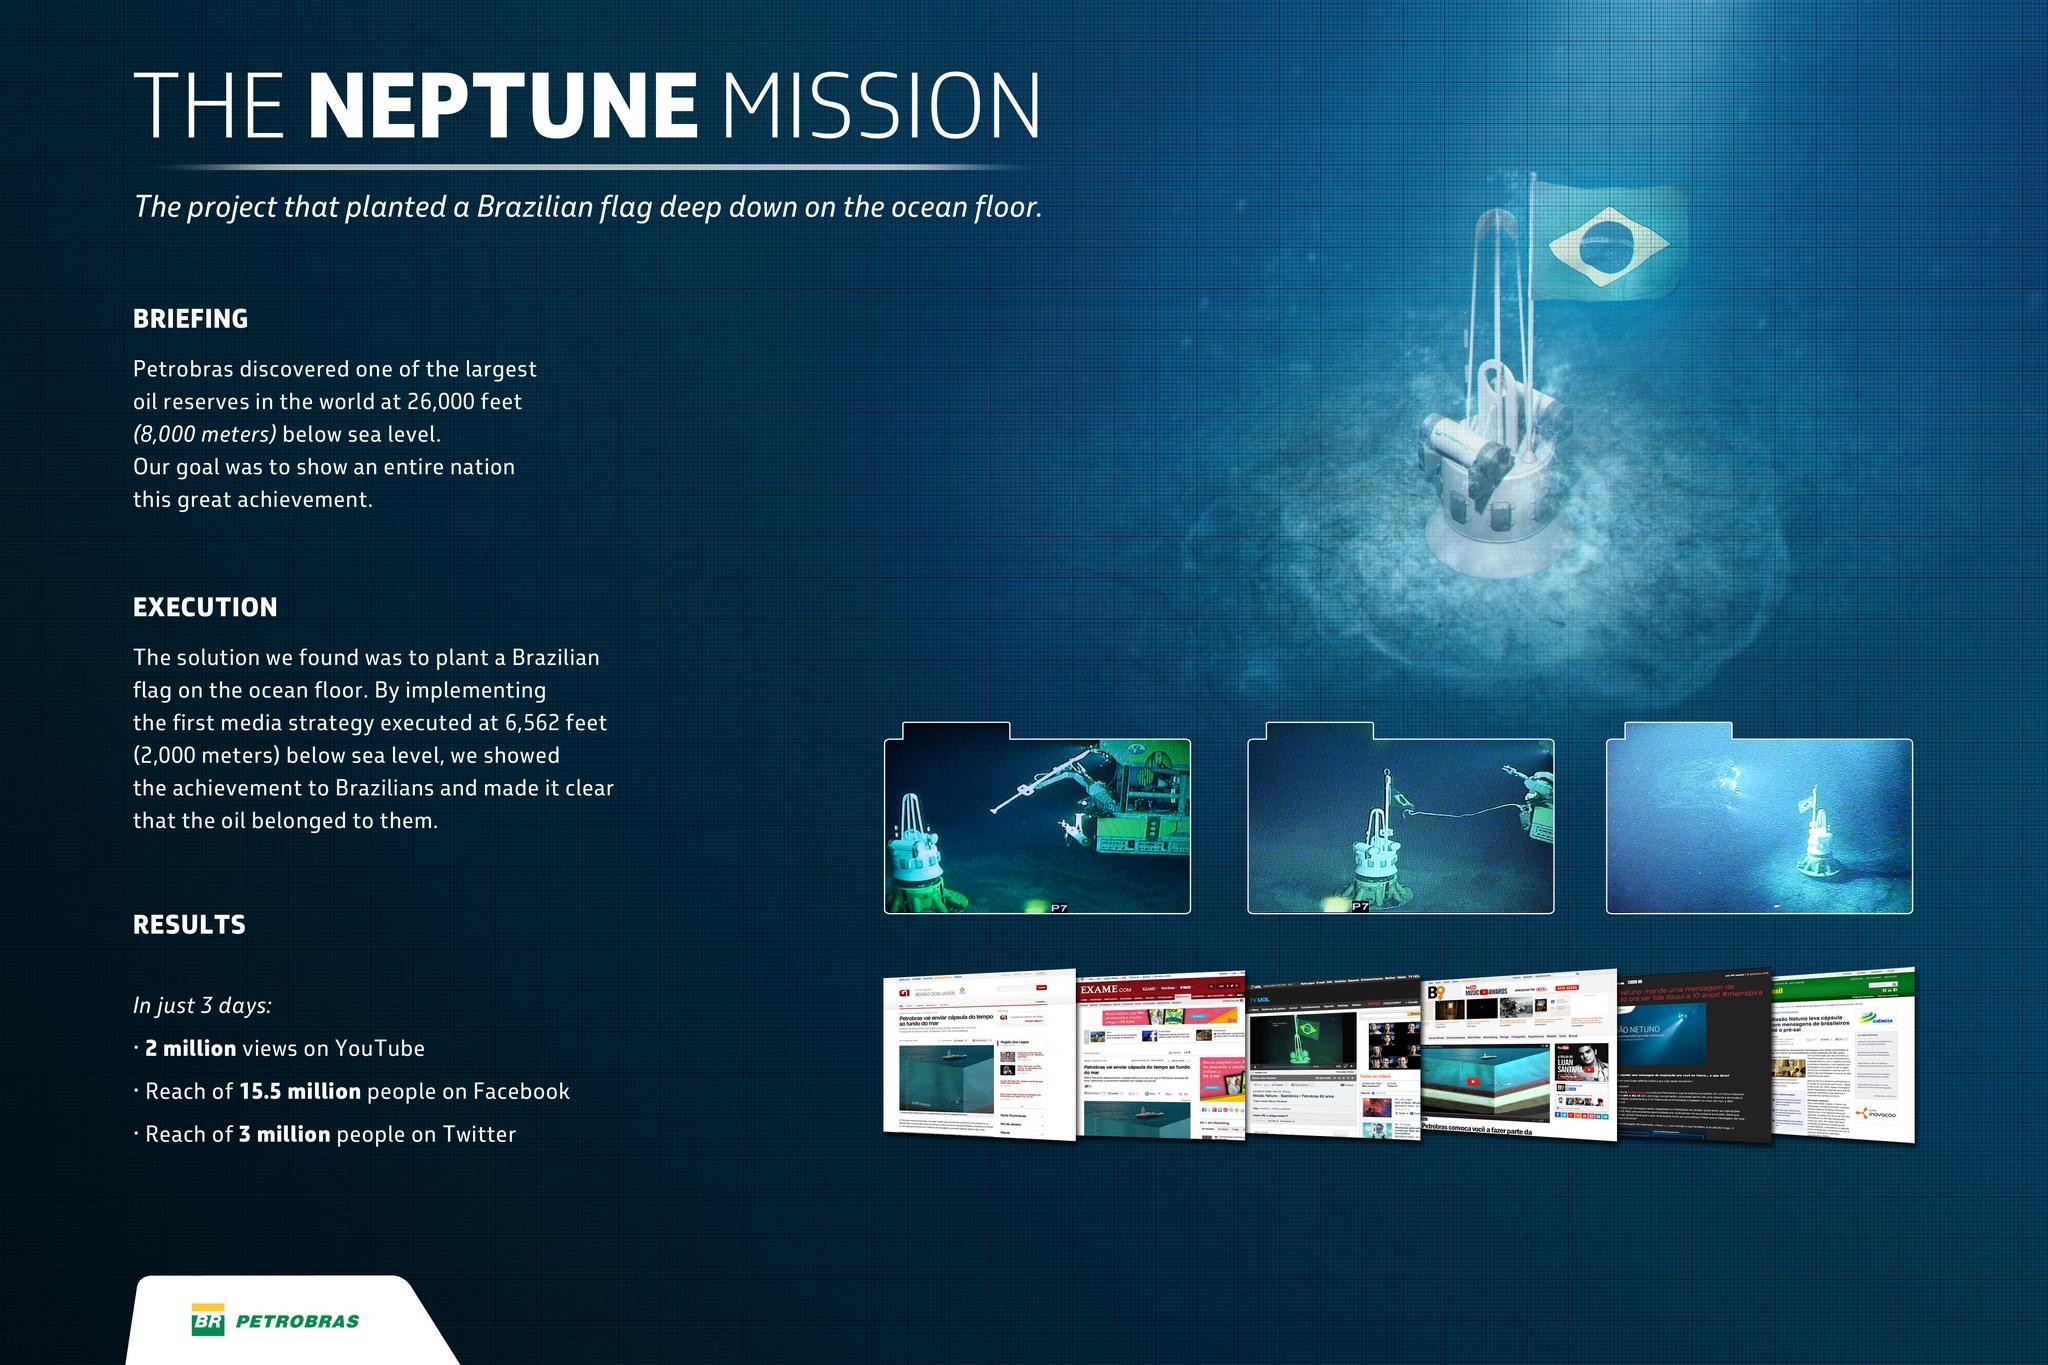 THE NEPTUNE MISSION